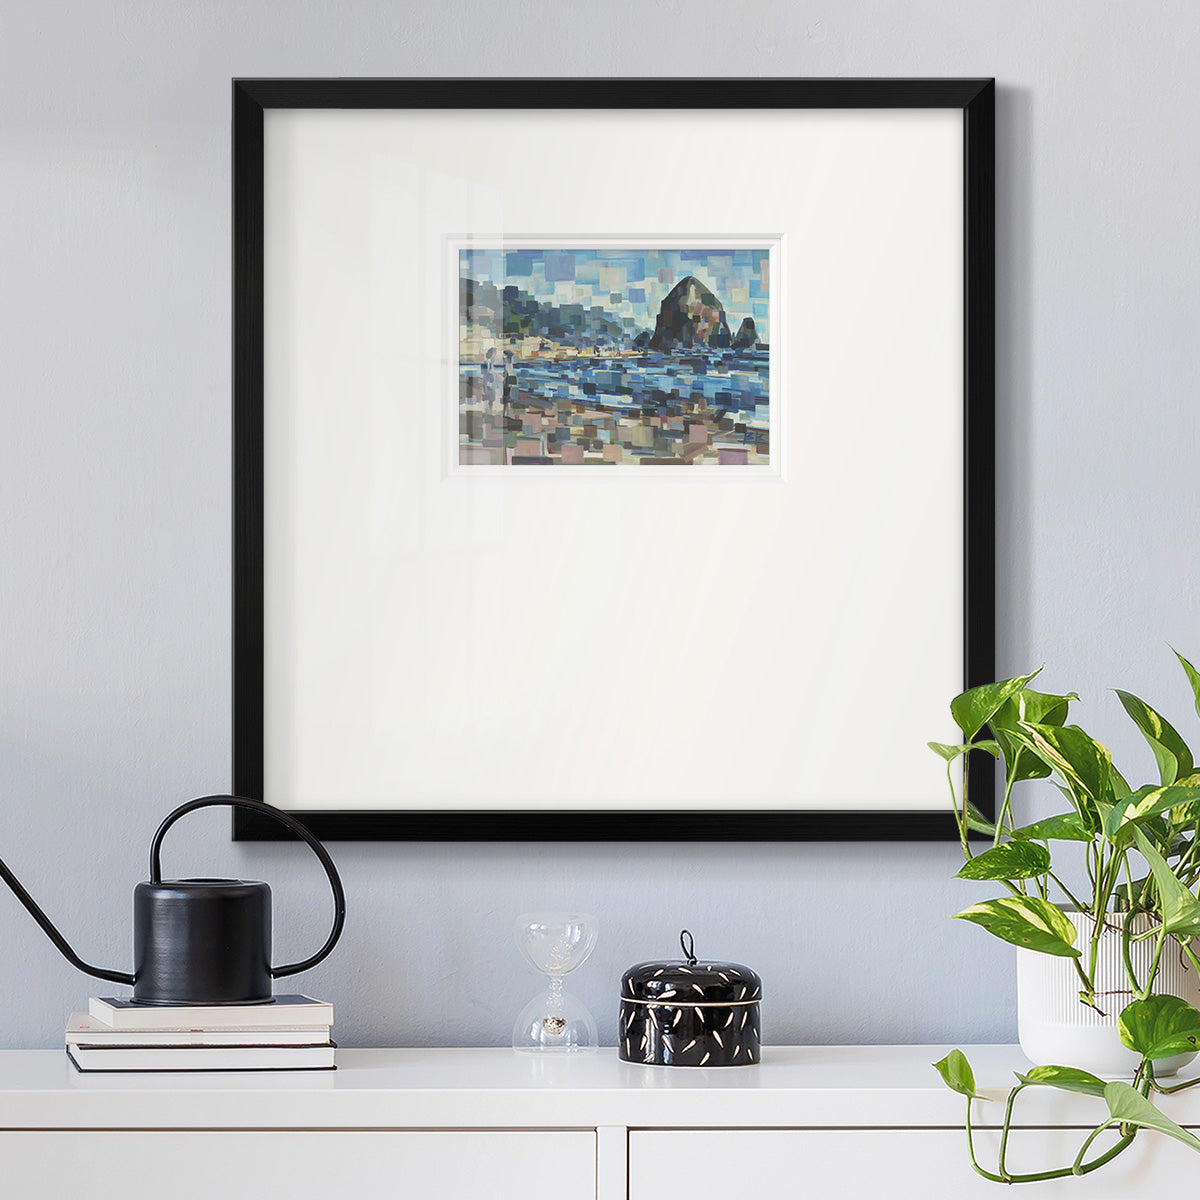 Evening in Cannon Beach- Premium Framed Print Double Matboard